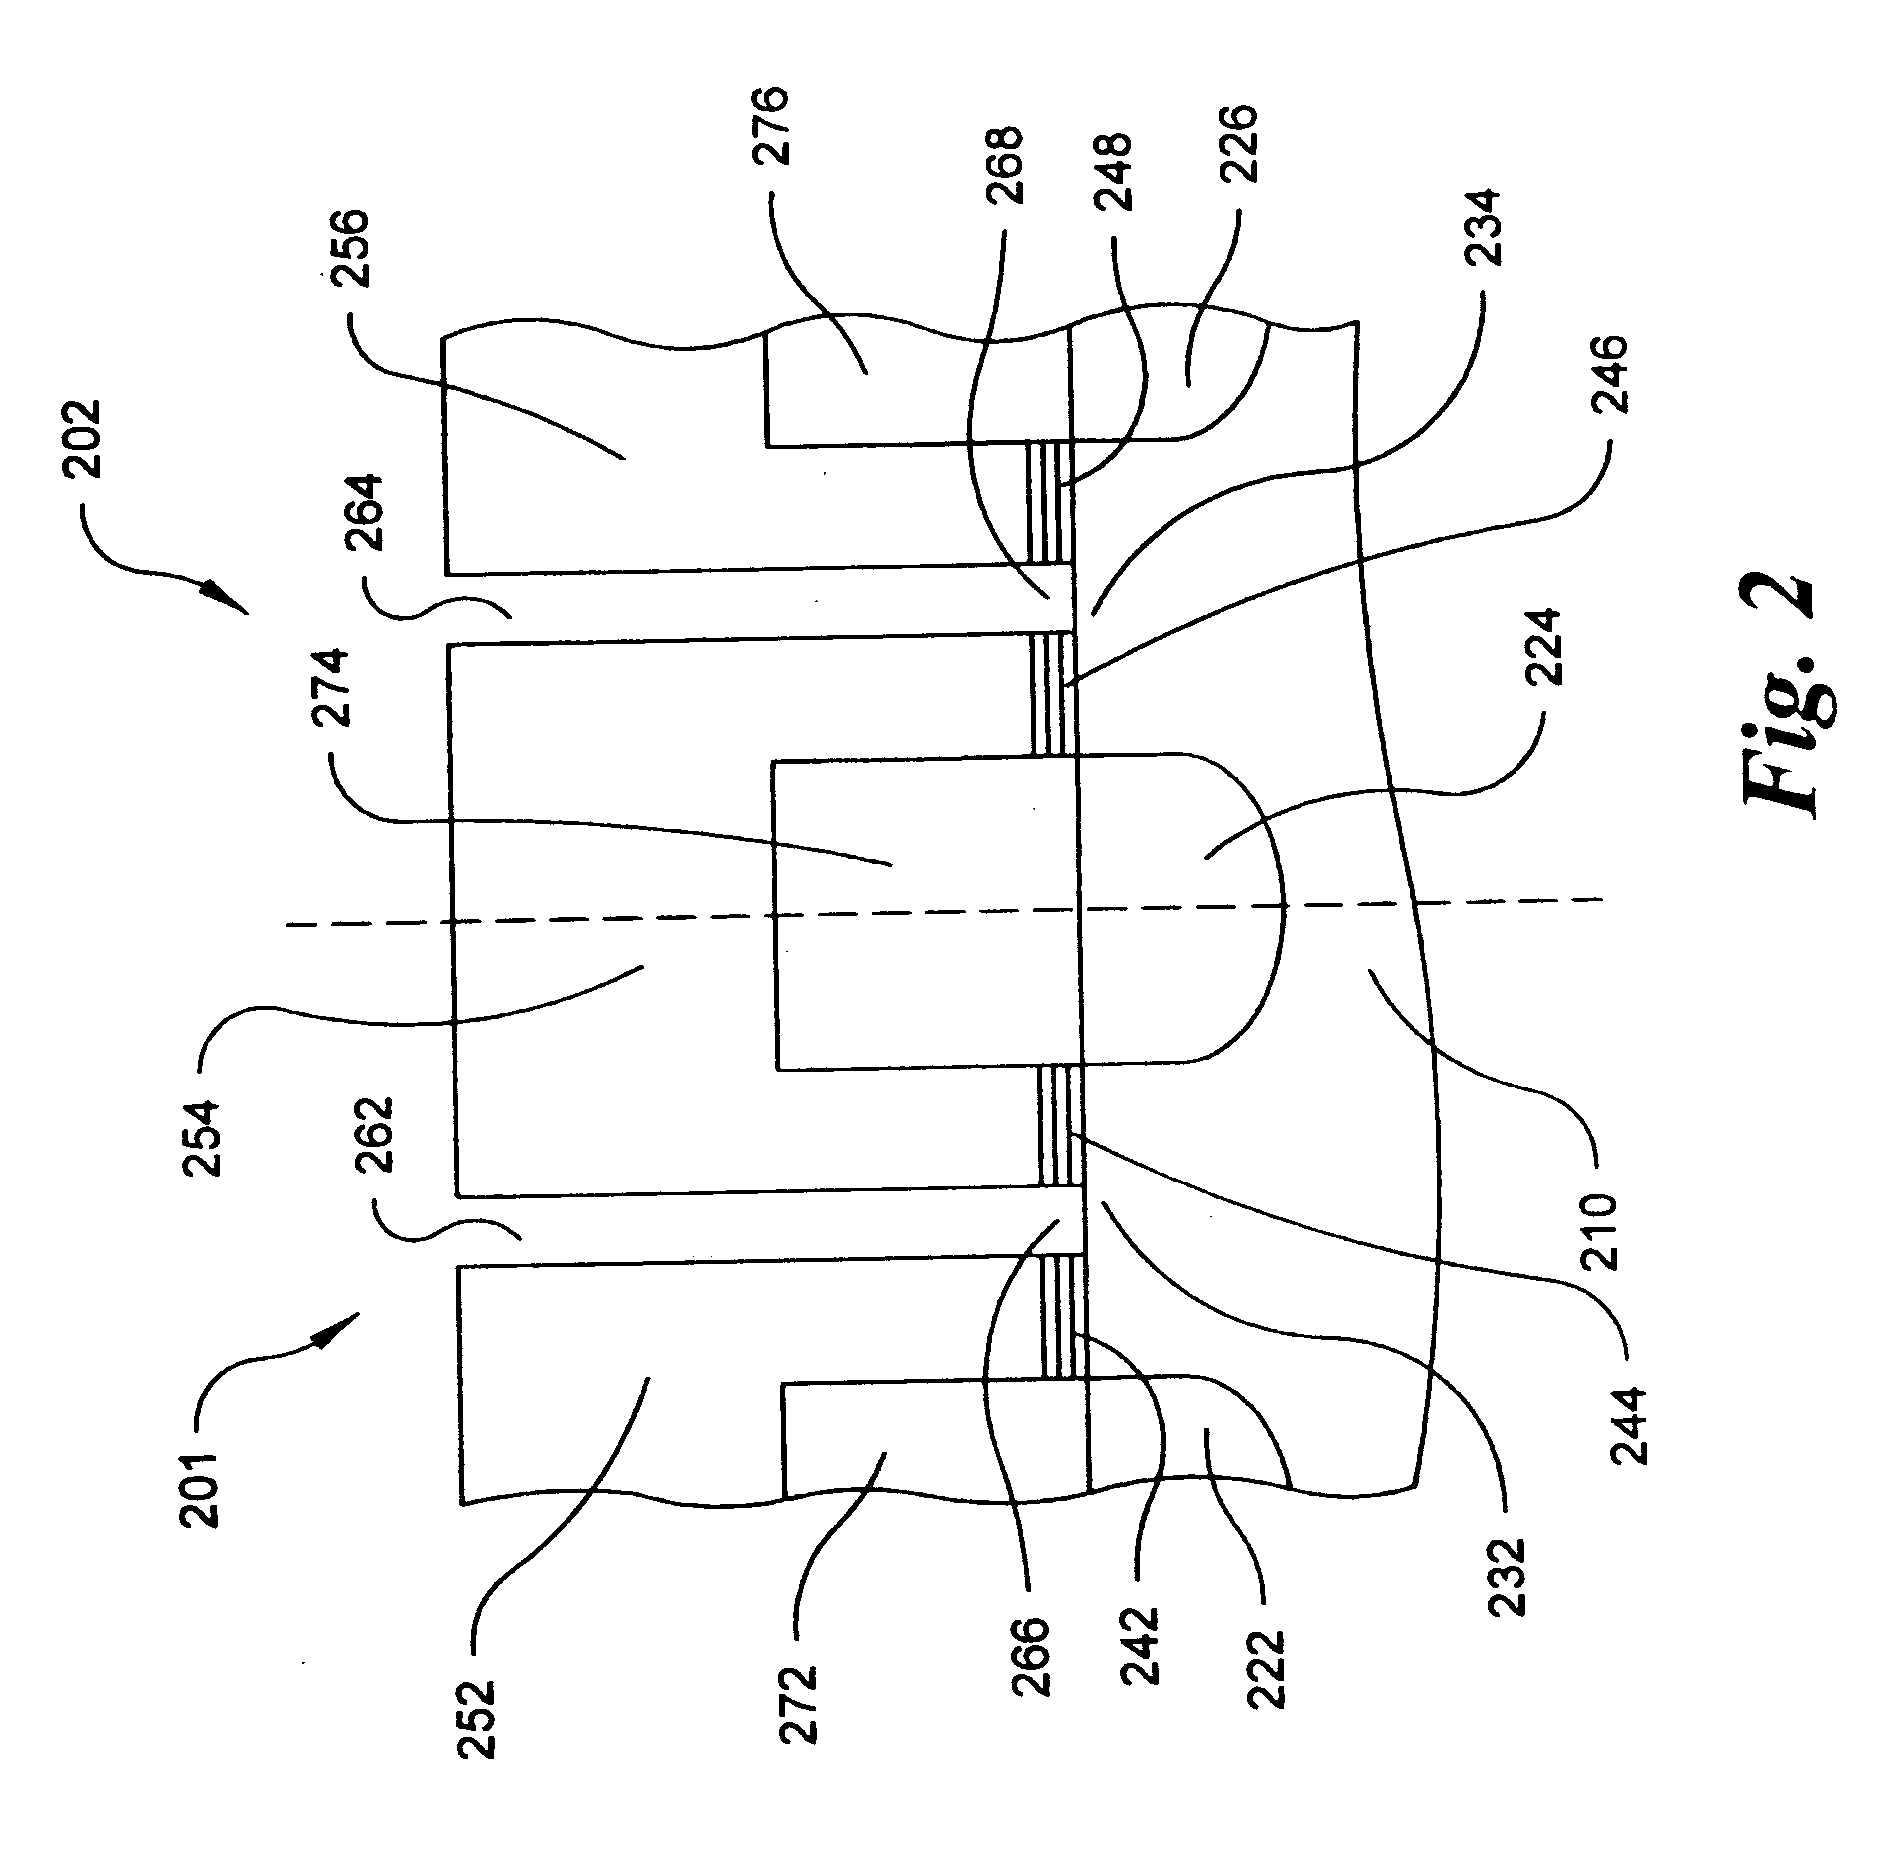 Dual-gate, non-volatile memory cells, arrays thereof, methods of manufacturing the same and methods of operating the same